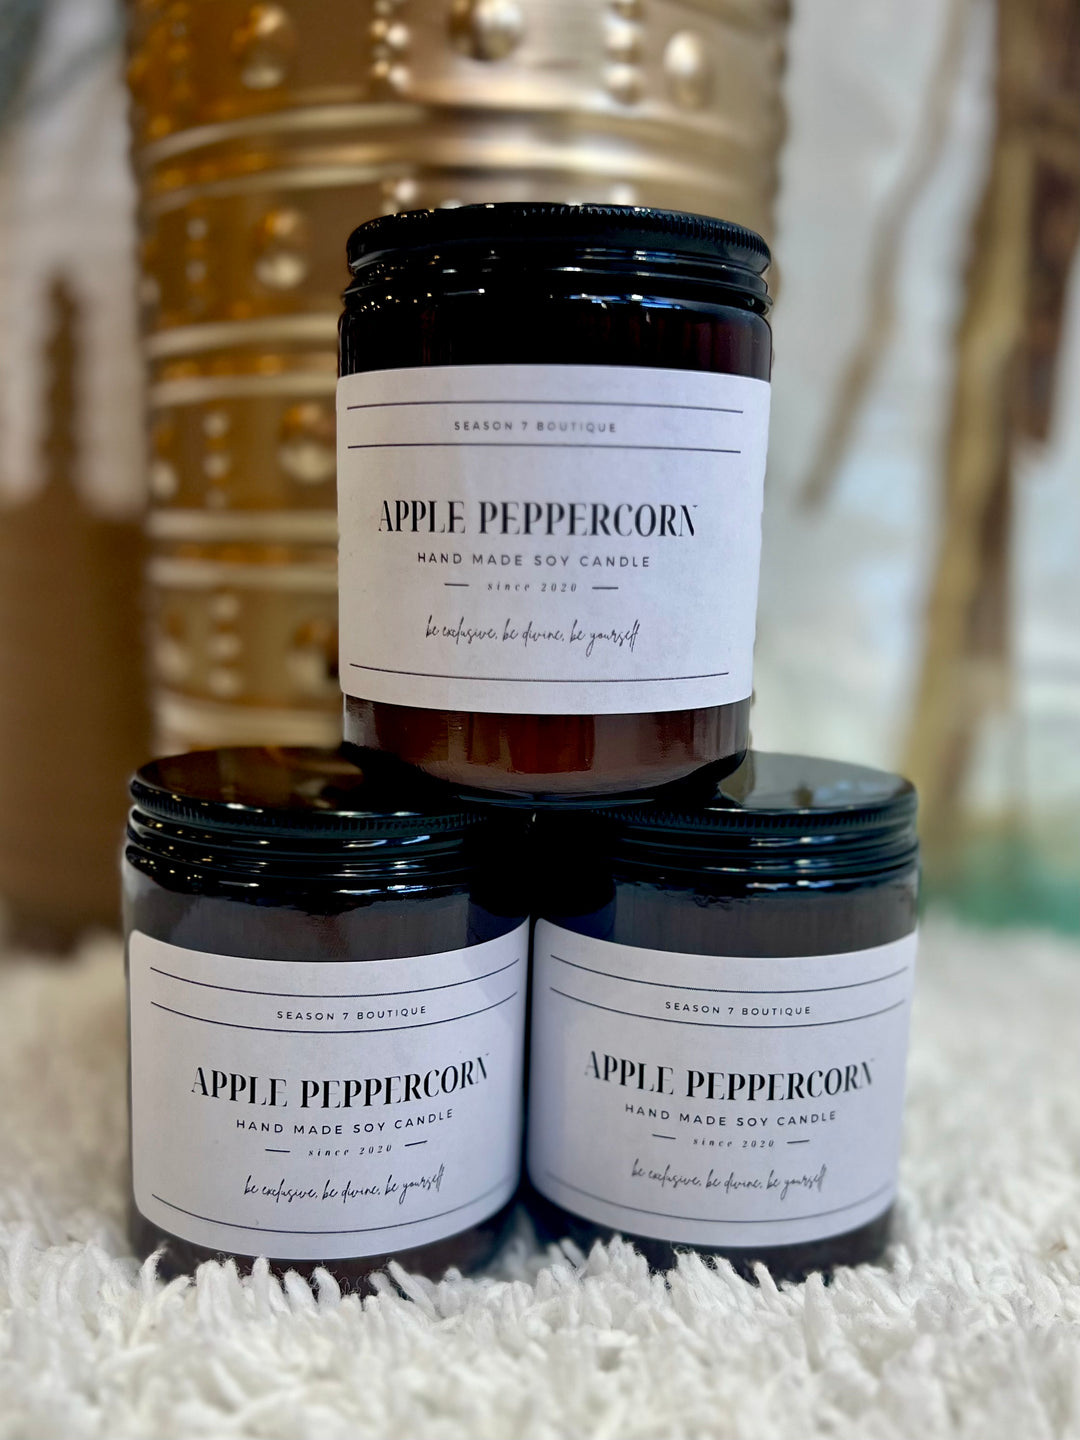 8oz Jar Hand Poured Soy Wax Candle, Apple Peppercorn